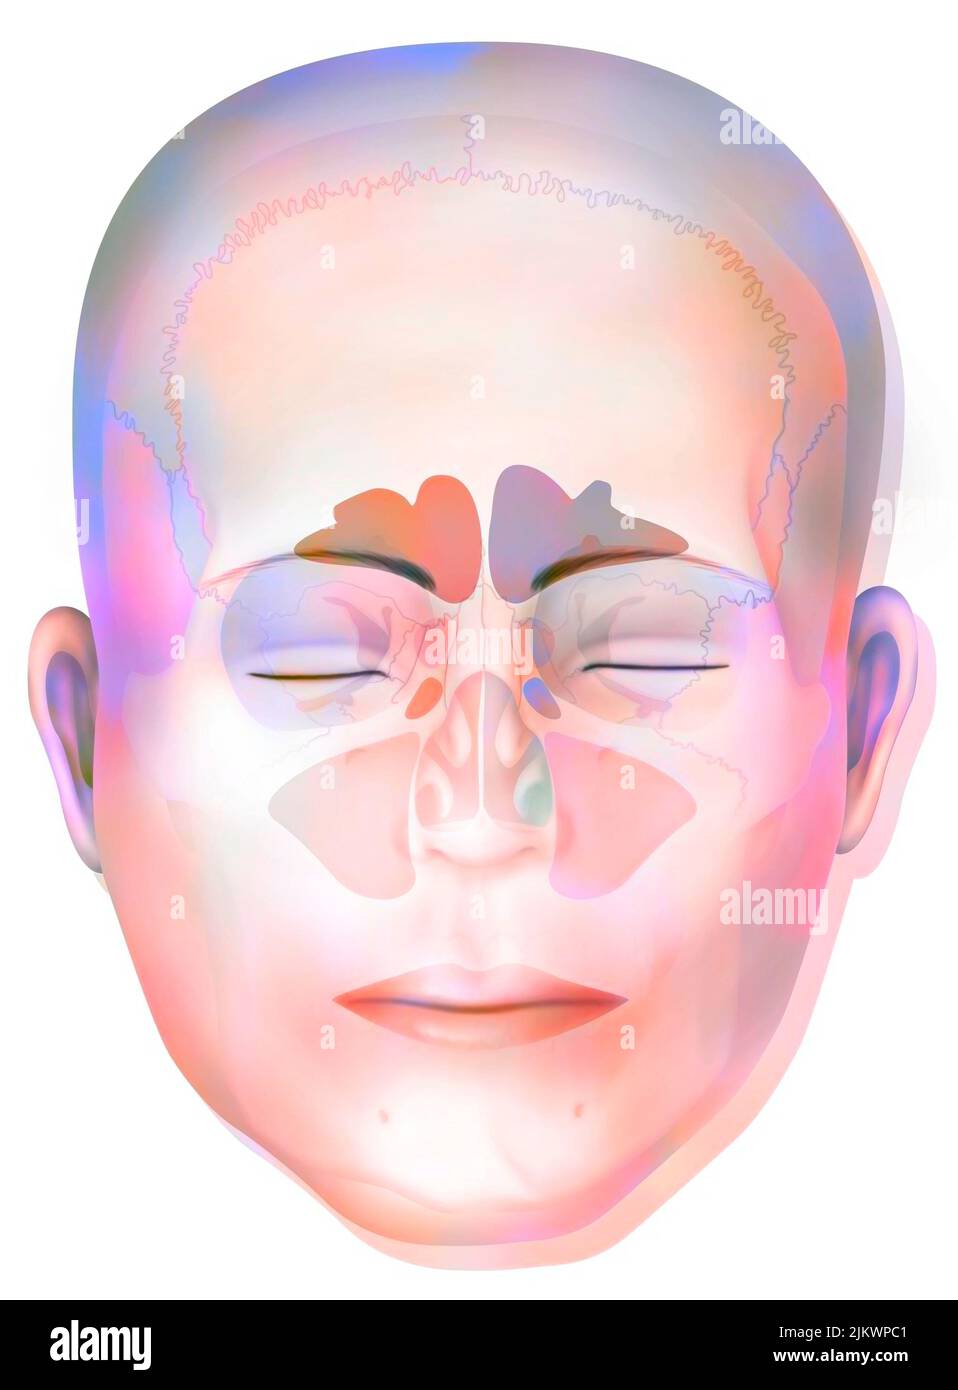 Sinus with frontal, sphenoidal, ethmoidal and maxillary sinuses. Stock Photo